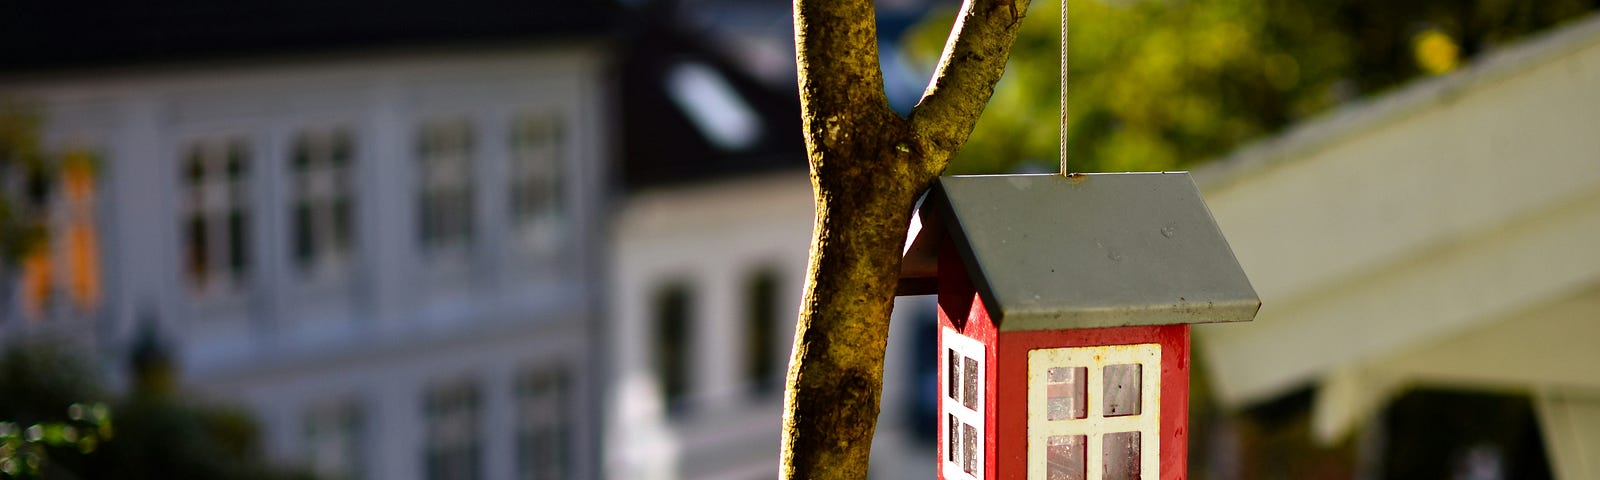 Small red birdhouse in front of a large white house